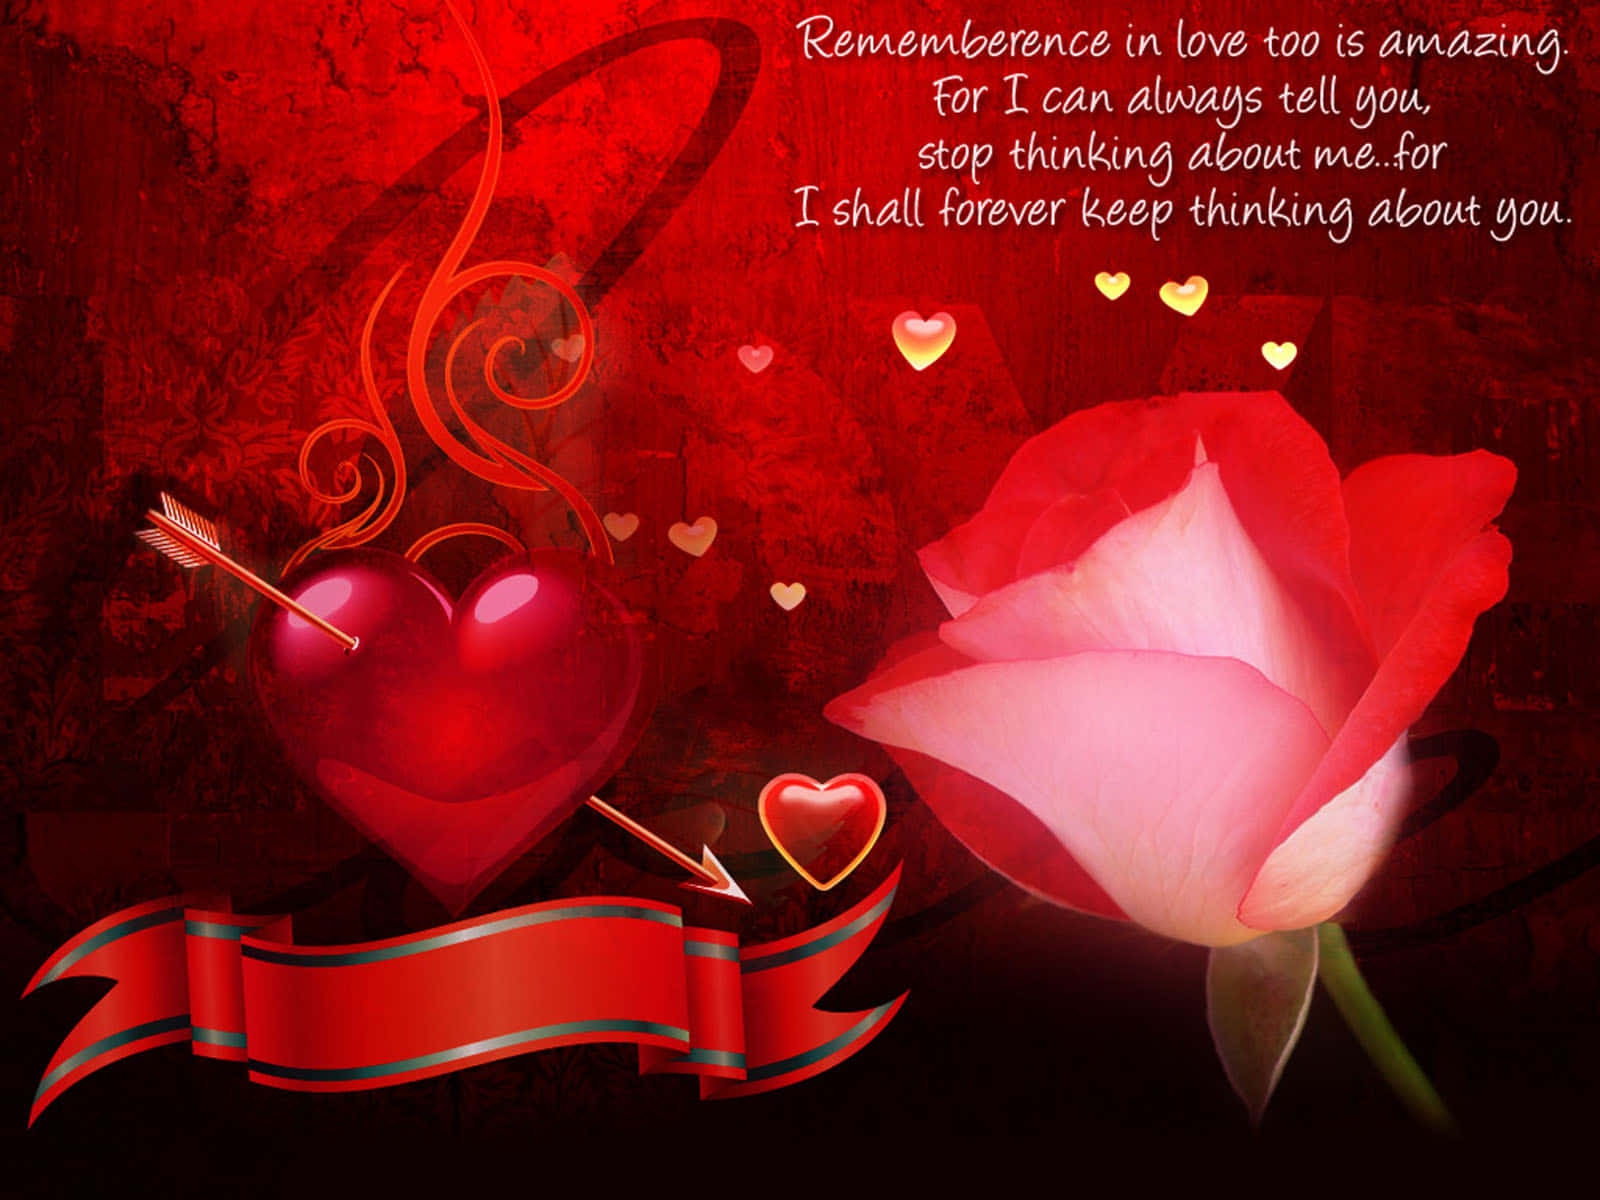 Eternal Love Quotewith Roseand Heart Wallpaper